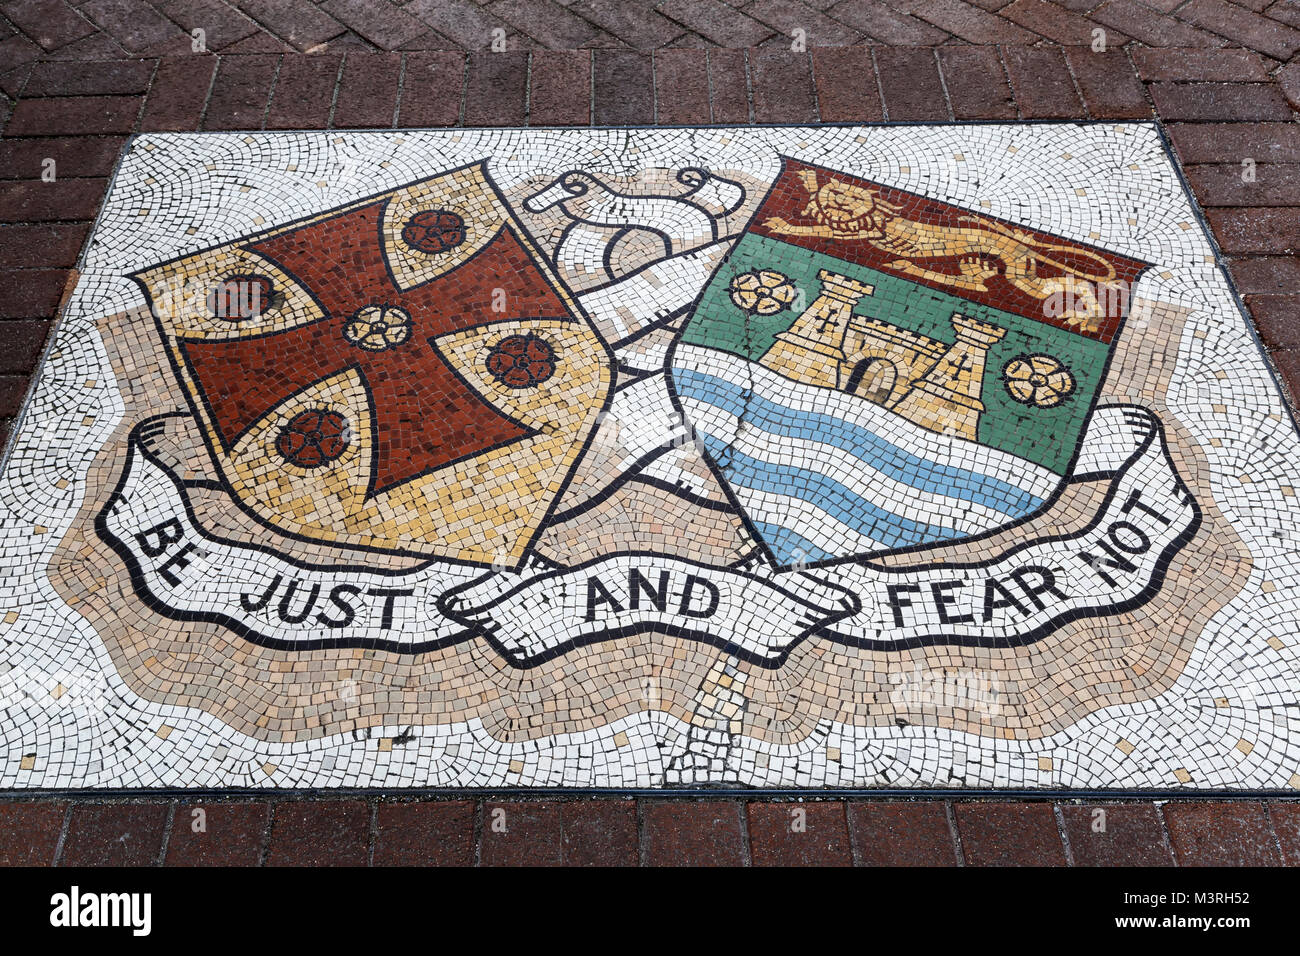 'Be Just and Fear Not', Carlisle's motto, entrance to Tullie House Museum and Art Gallery, Carlisle, Cumbria, England, United Kingdom Stock Photo